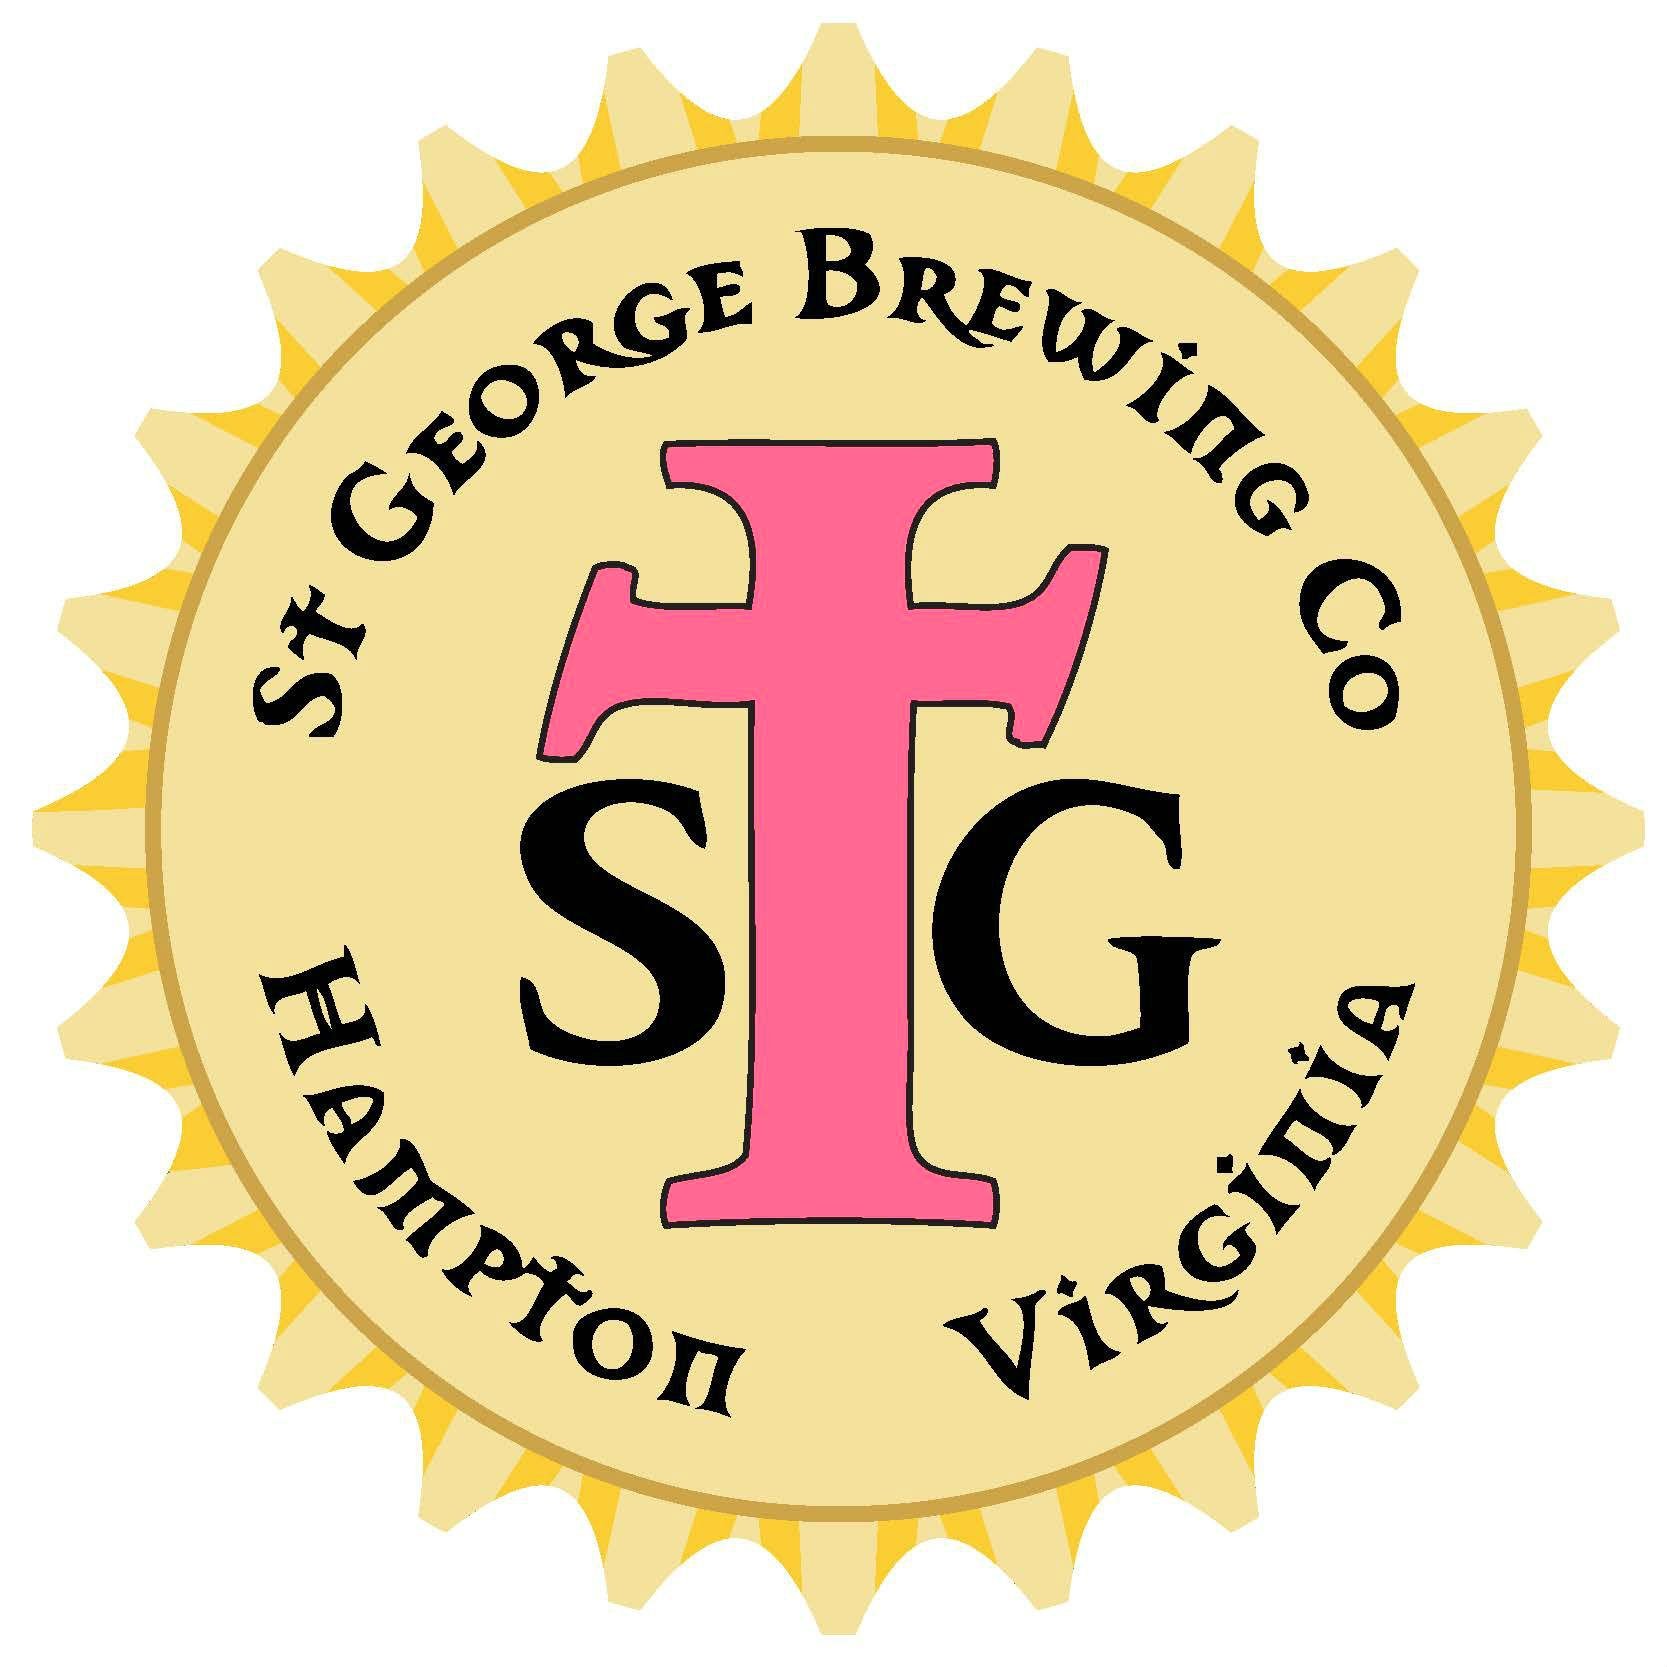 St George Brewing Co